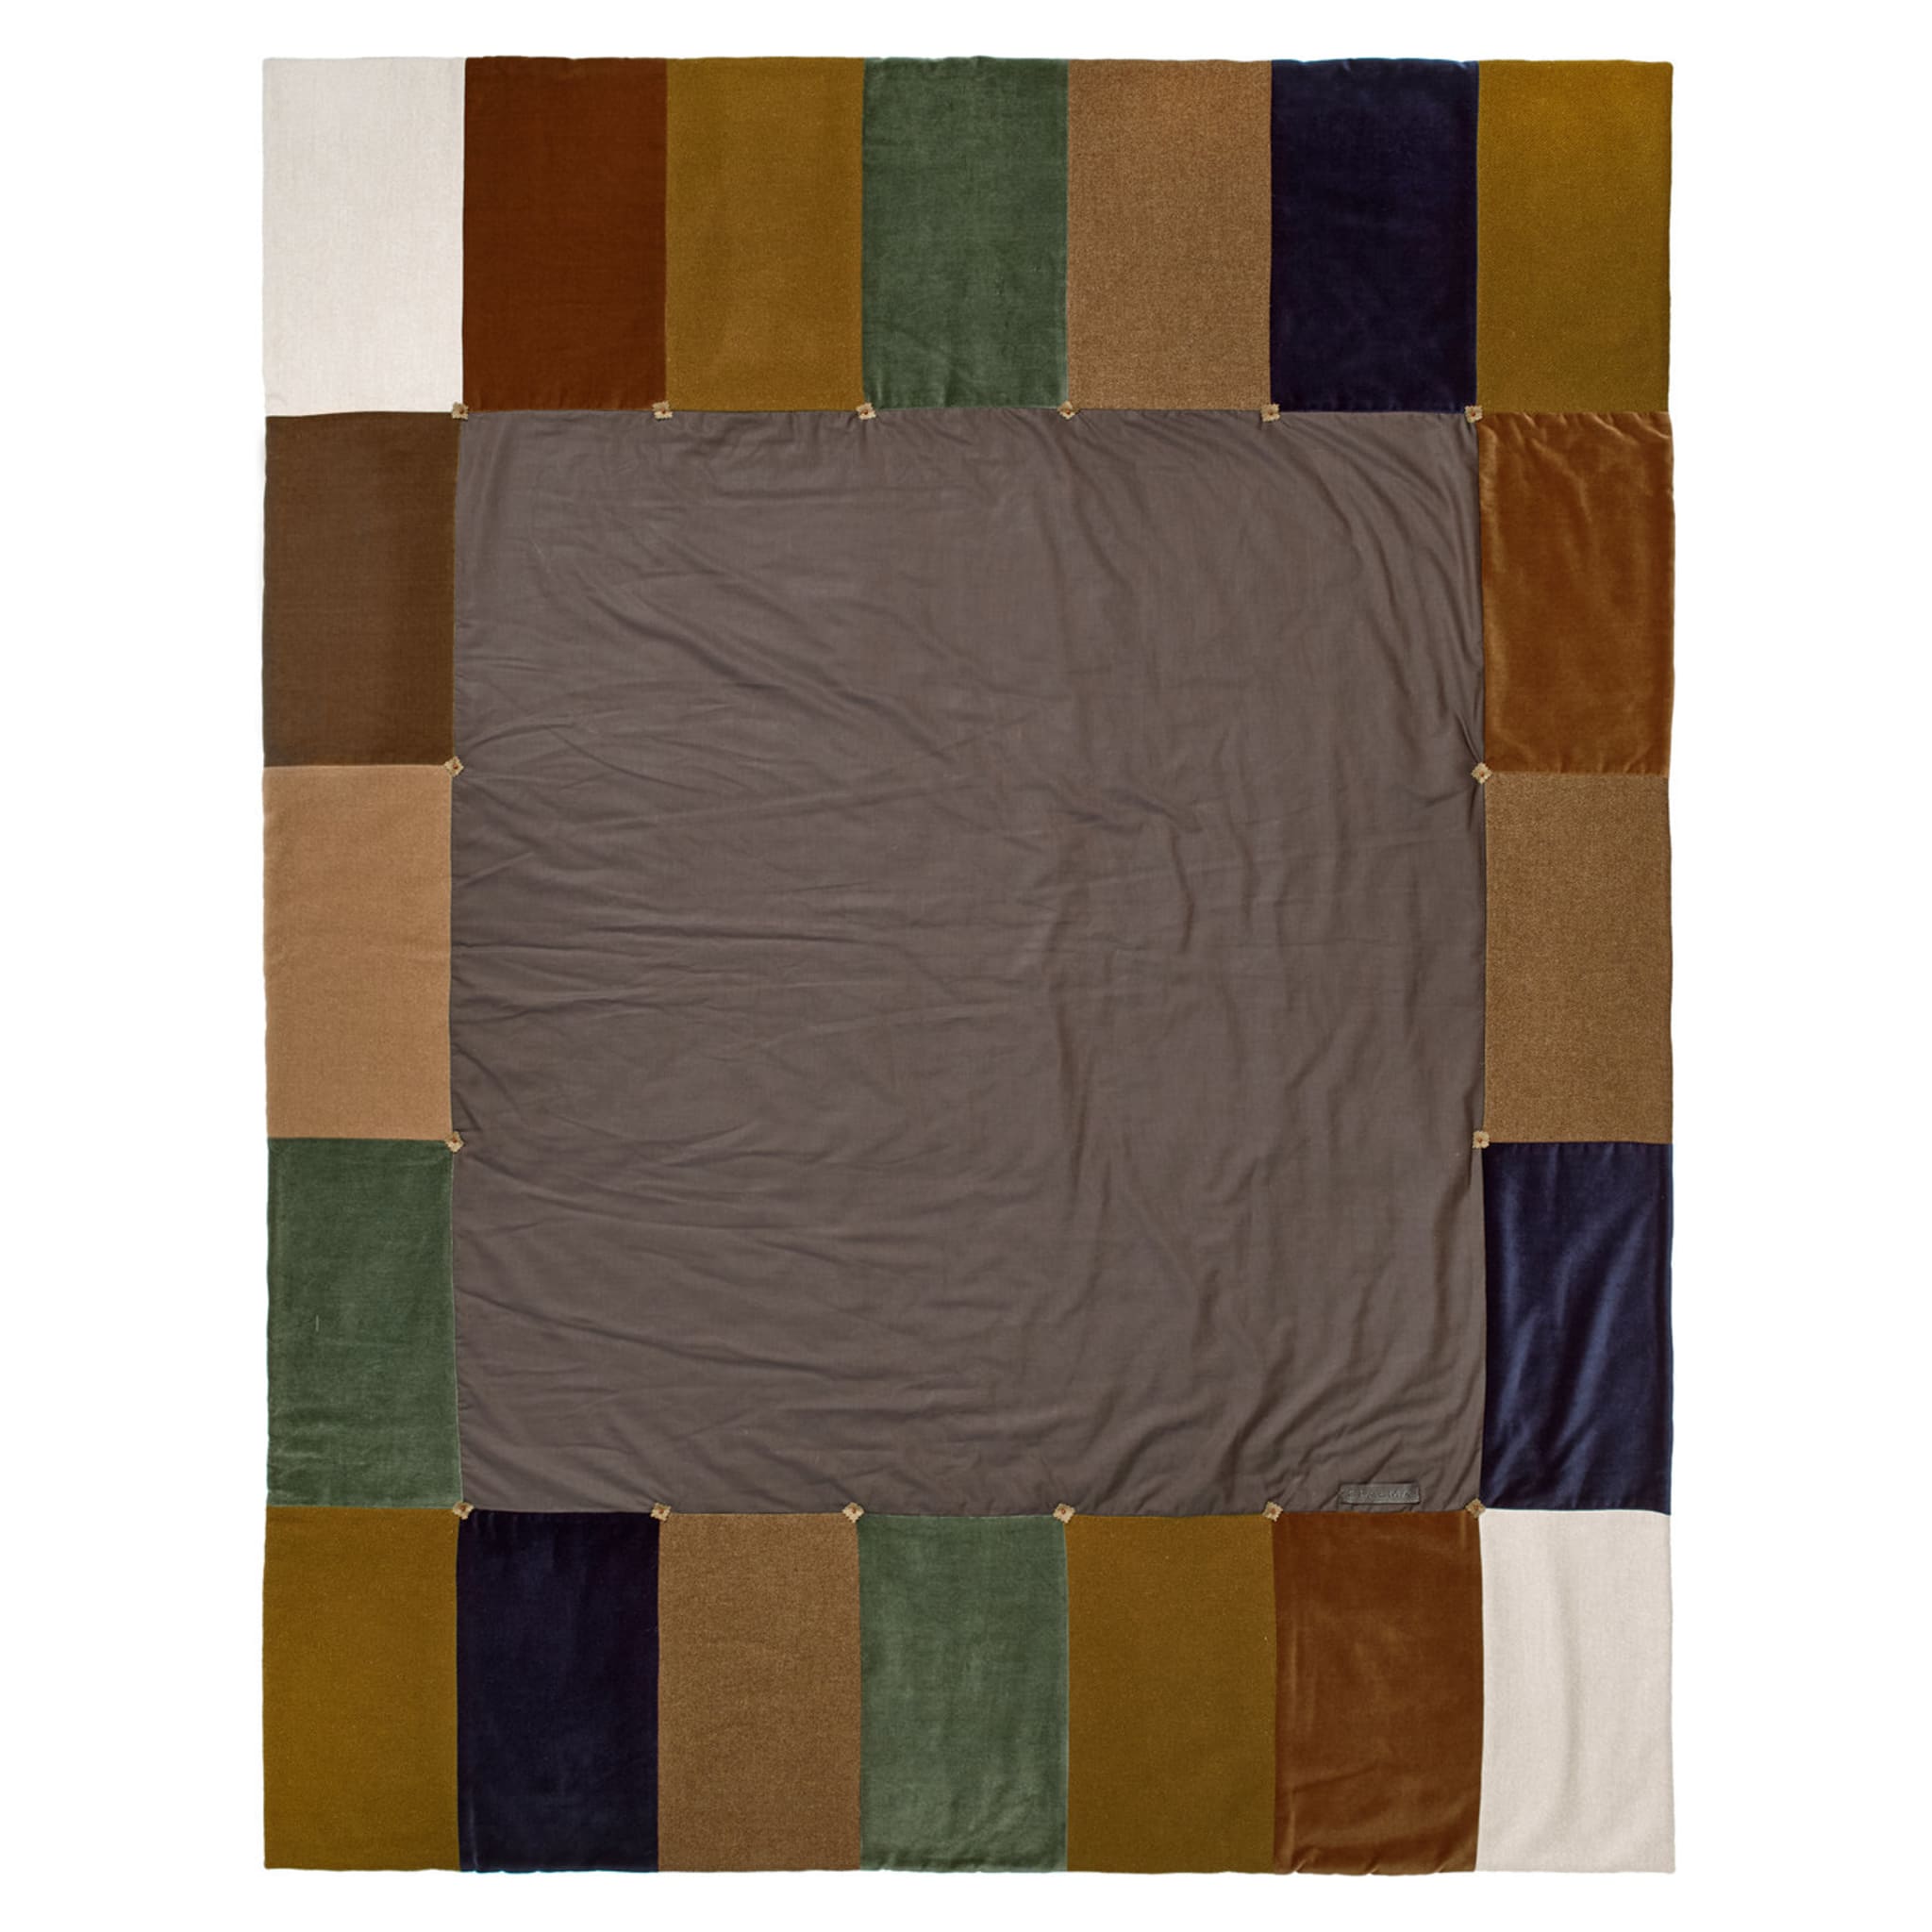 Multicolor and Midnight Blue Throw - Alternative view 1